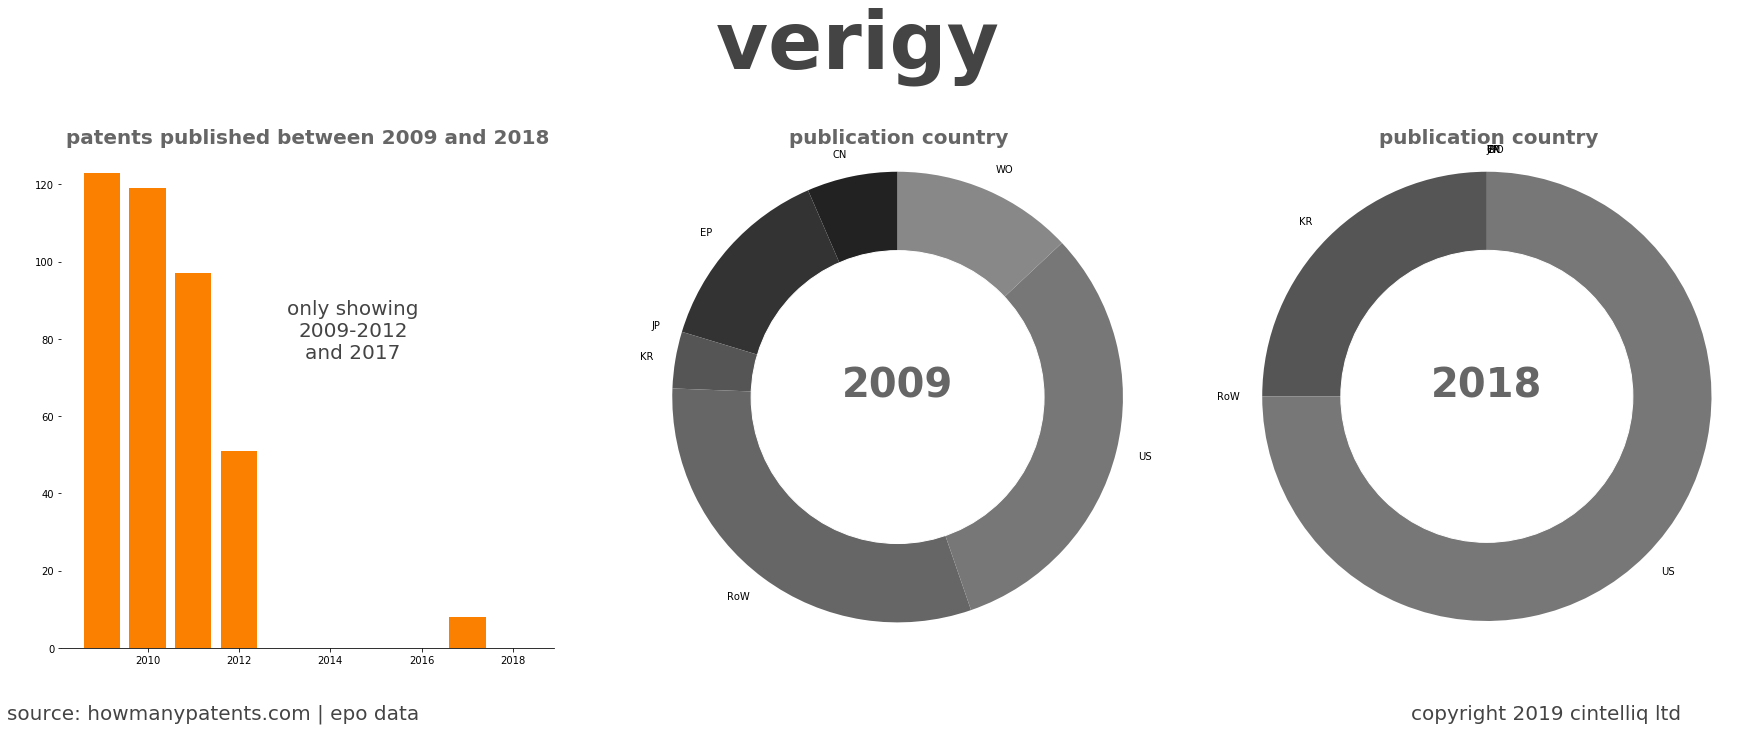 summary of patents for Verigy 